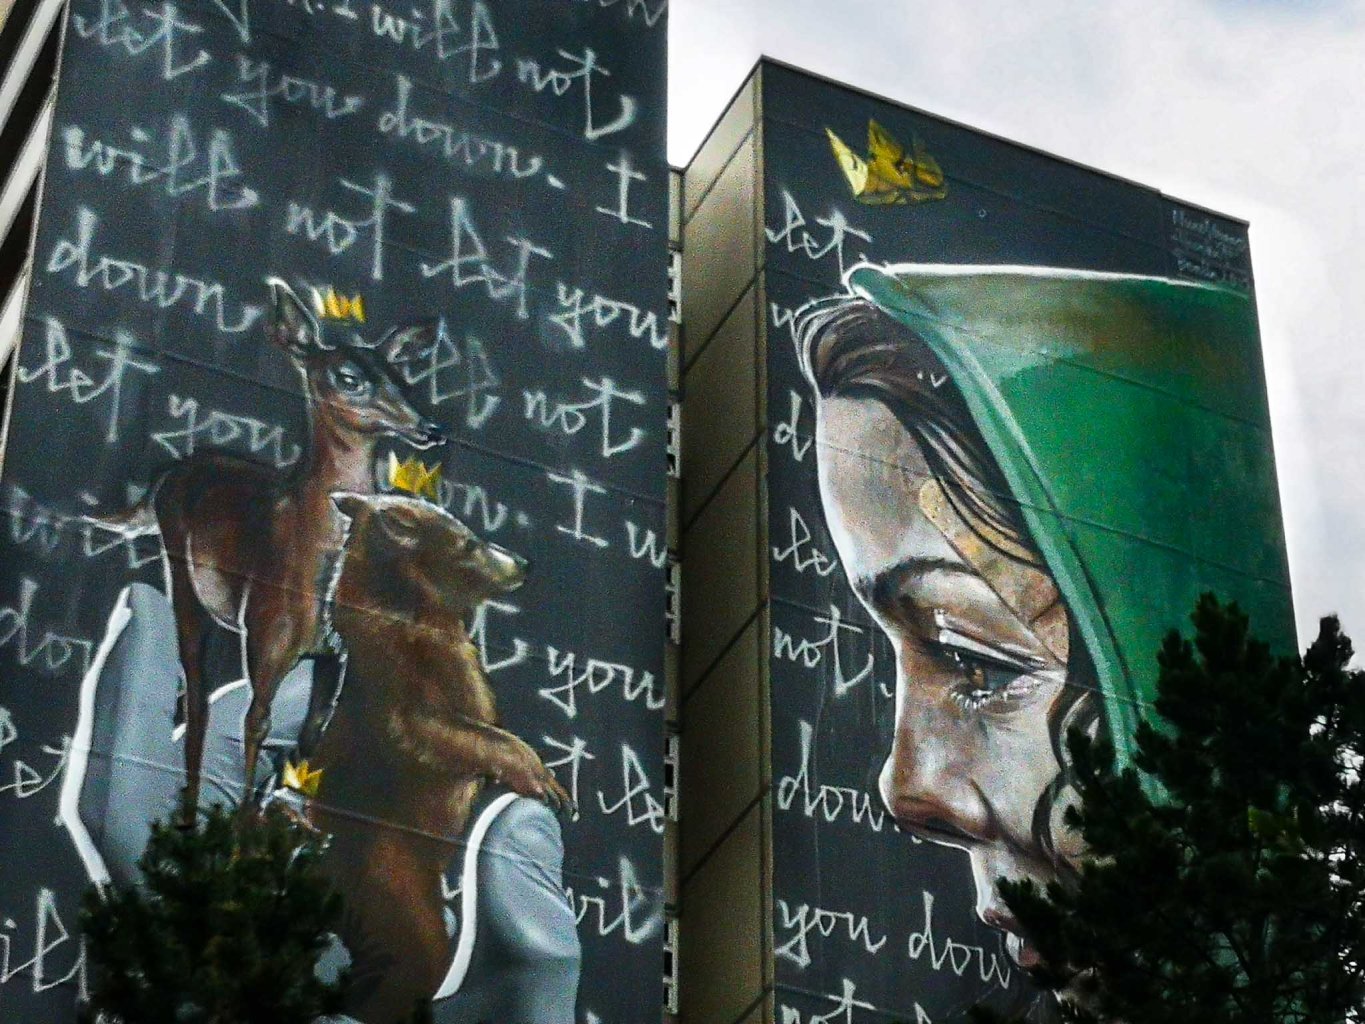 Detail of the "real recognizes real"-mural by Herakut and Nuno Viegas